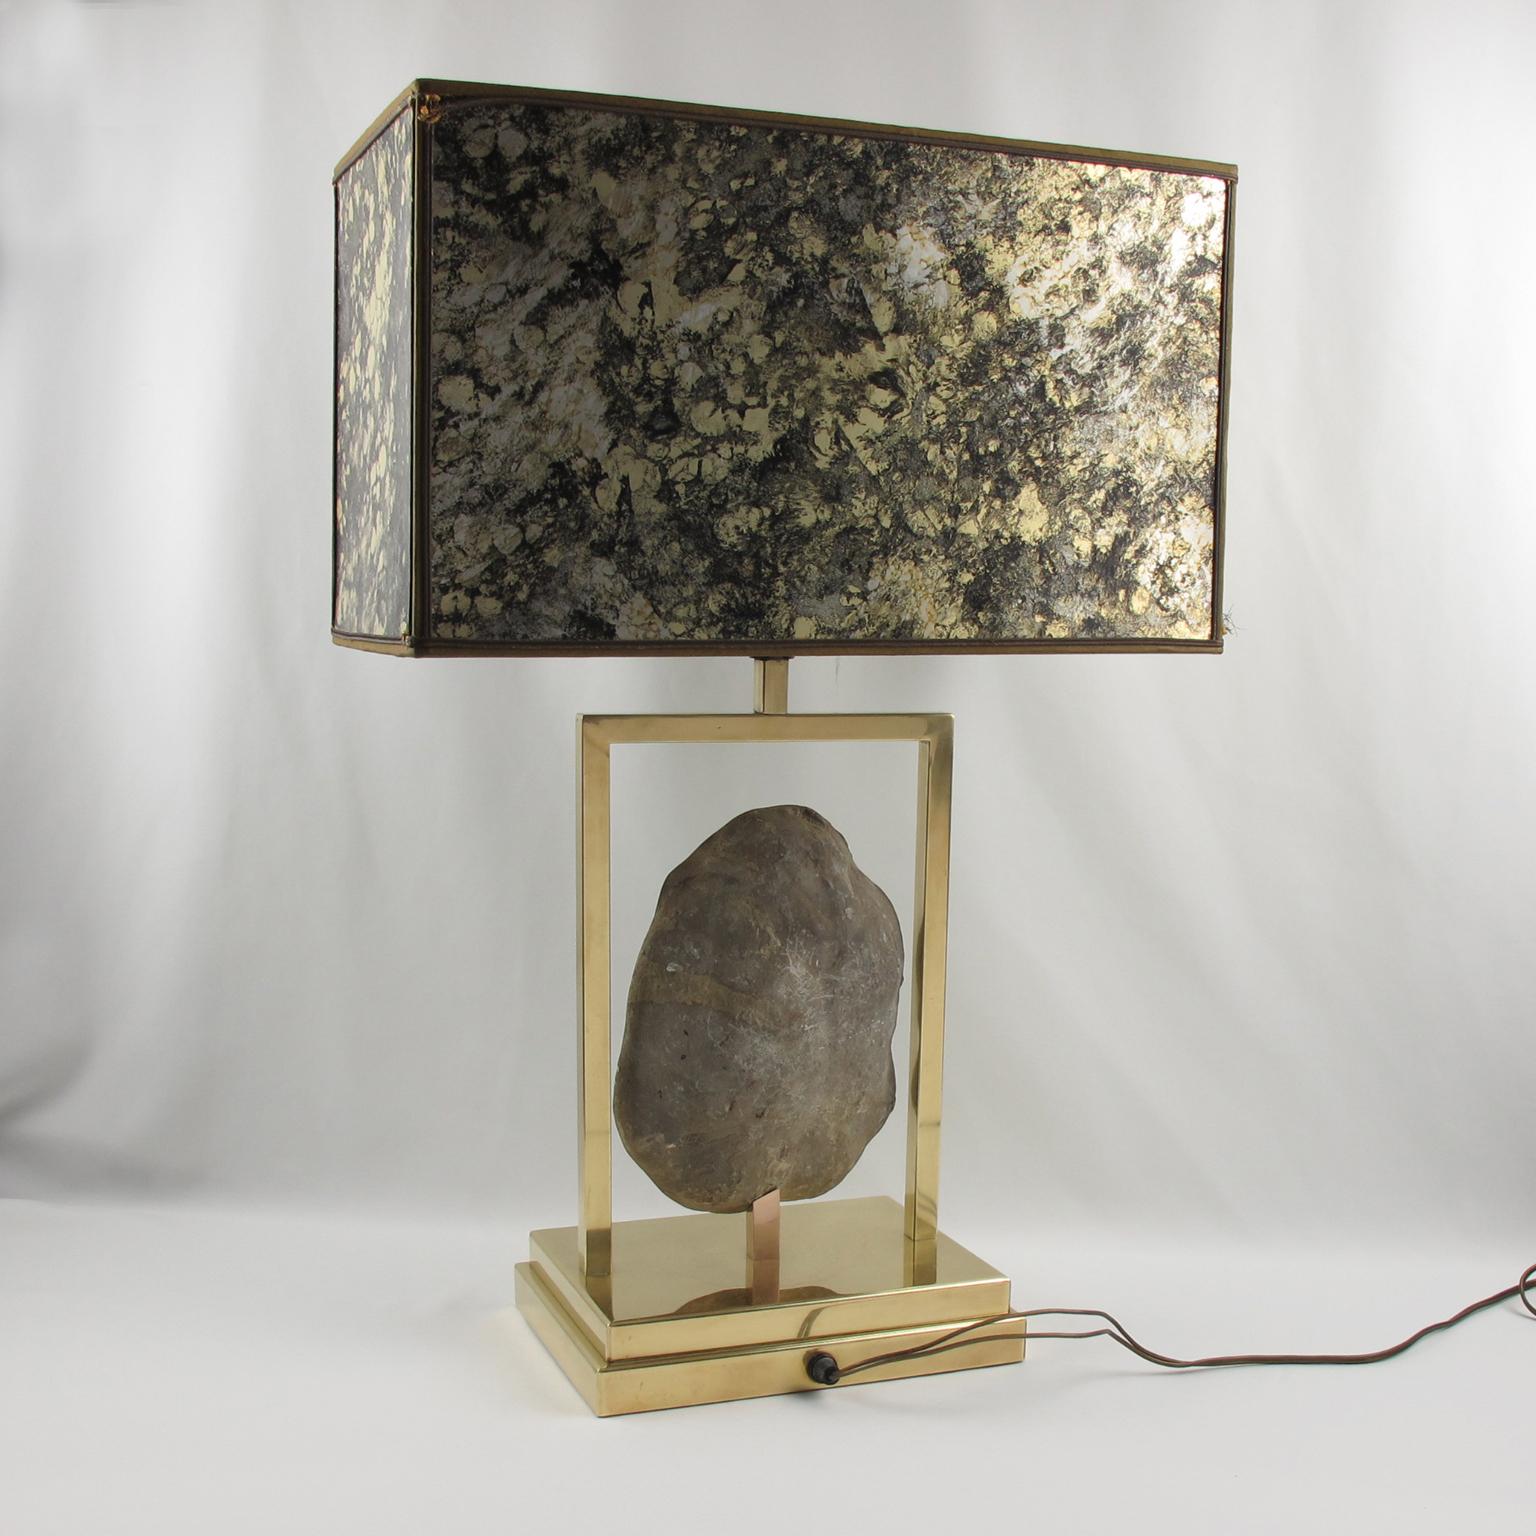 Belgian Willy Daro Brass and Geode Stone Table Lamp, 1970s